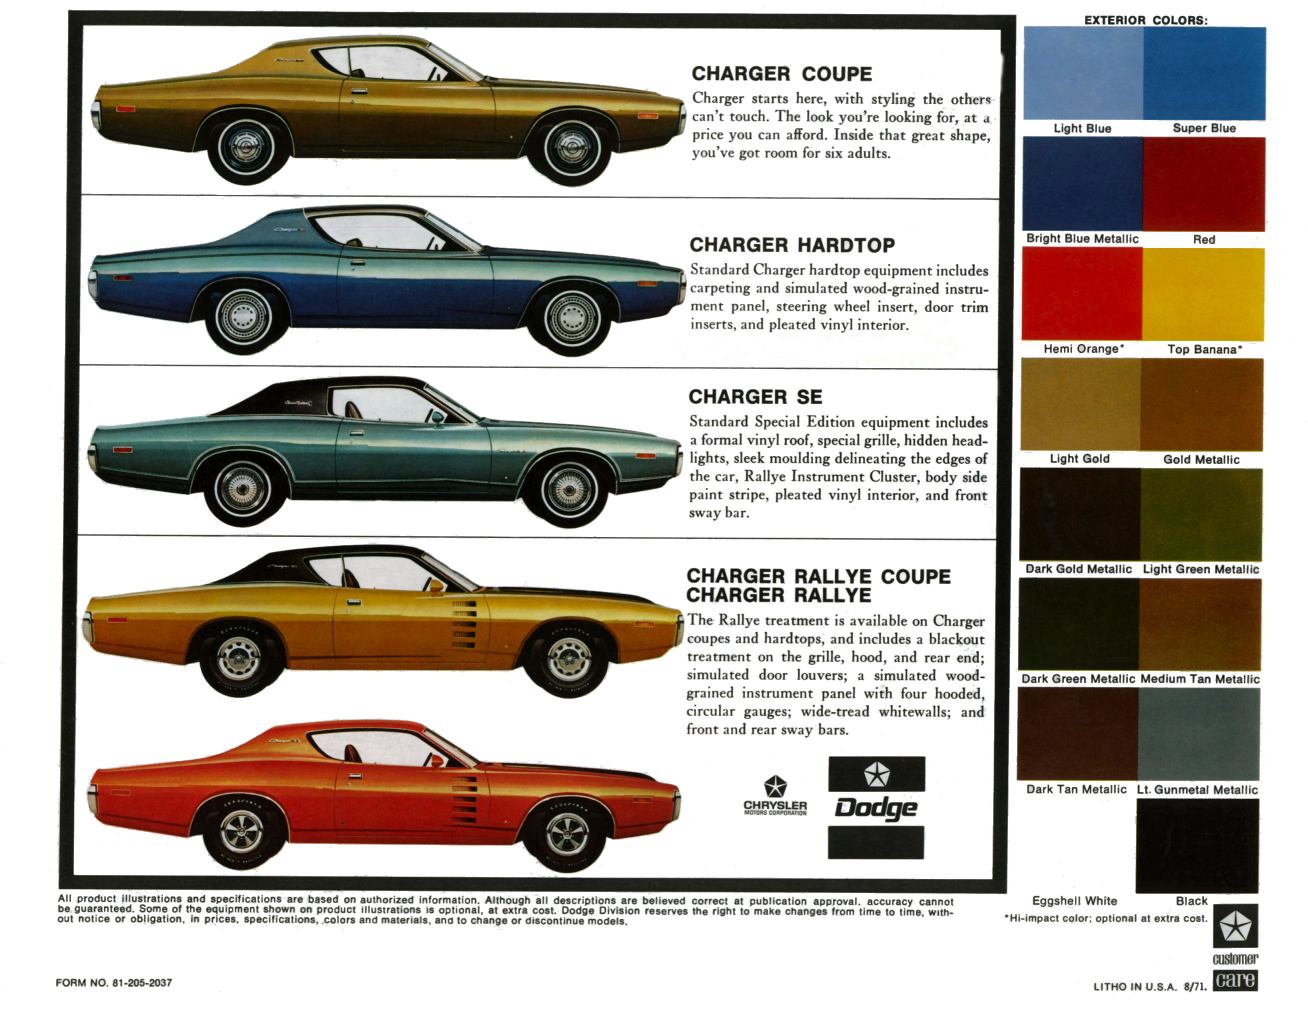 1972 Dodge Charger Brochure Page 4